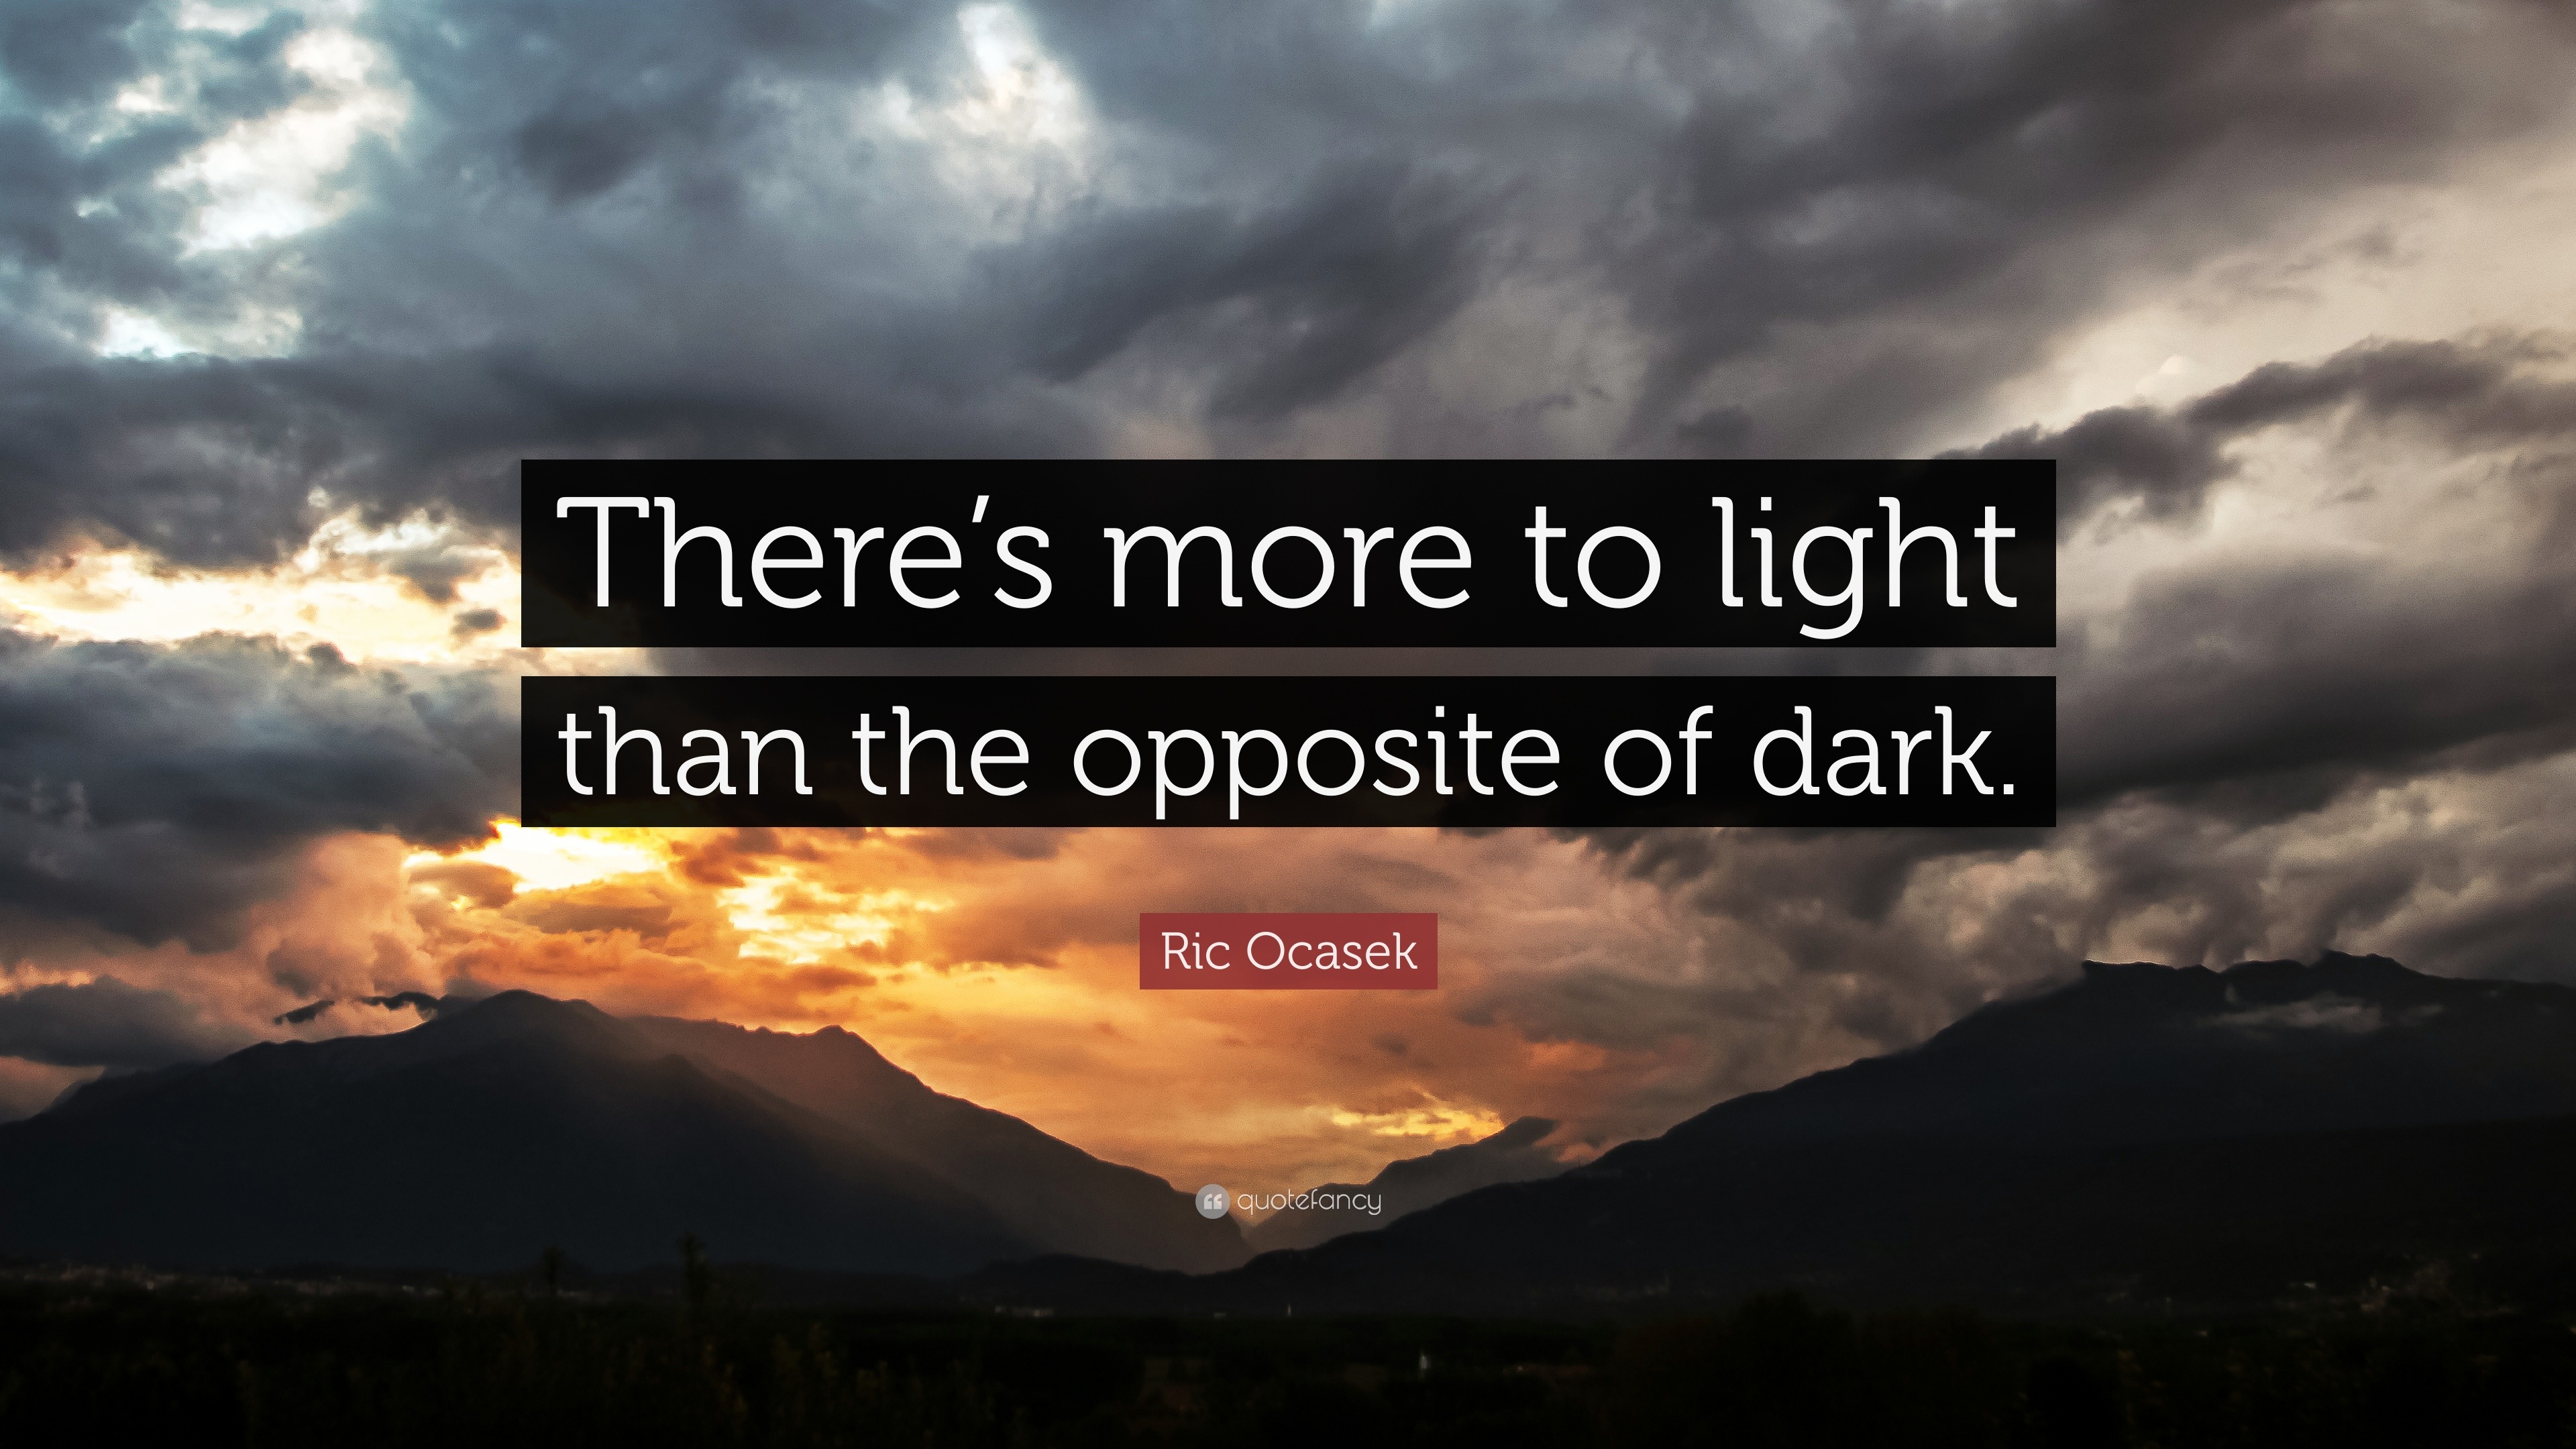 Ric Ocasek Quote: “There’s more to light than the opposite of dark.”